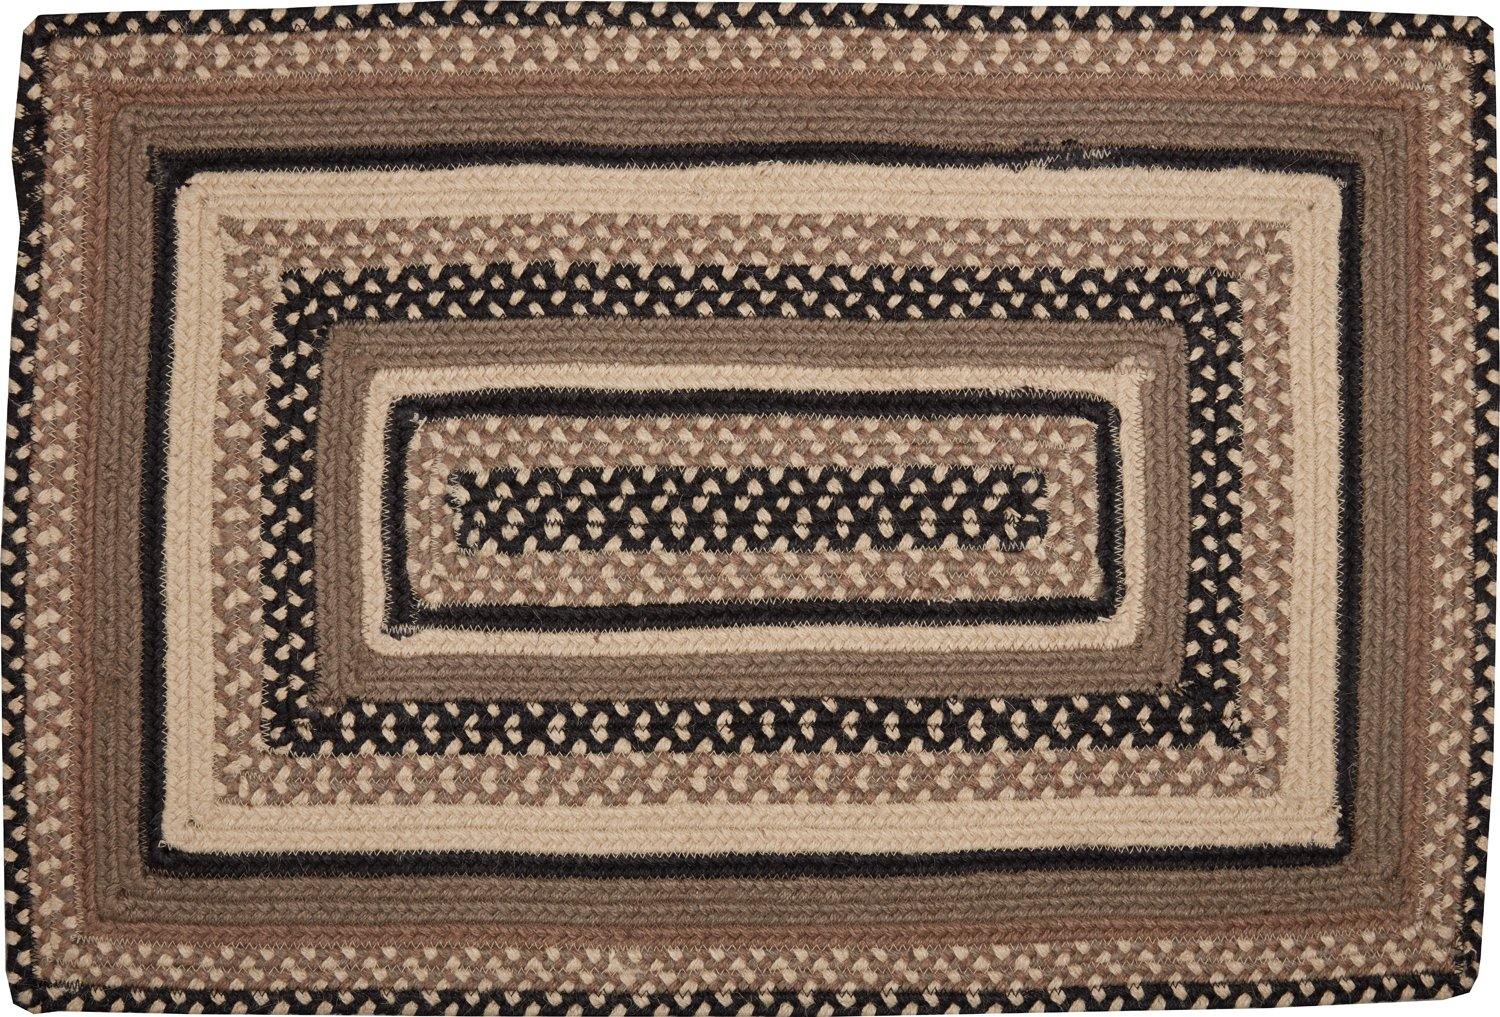 Sawyer Mill Charcoal Jute Braided Rug Rect 20"x30" with Rug Pad VHC Brands - The Fox Decor